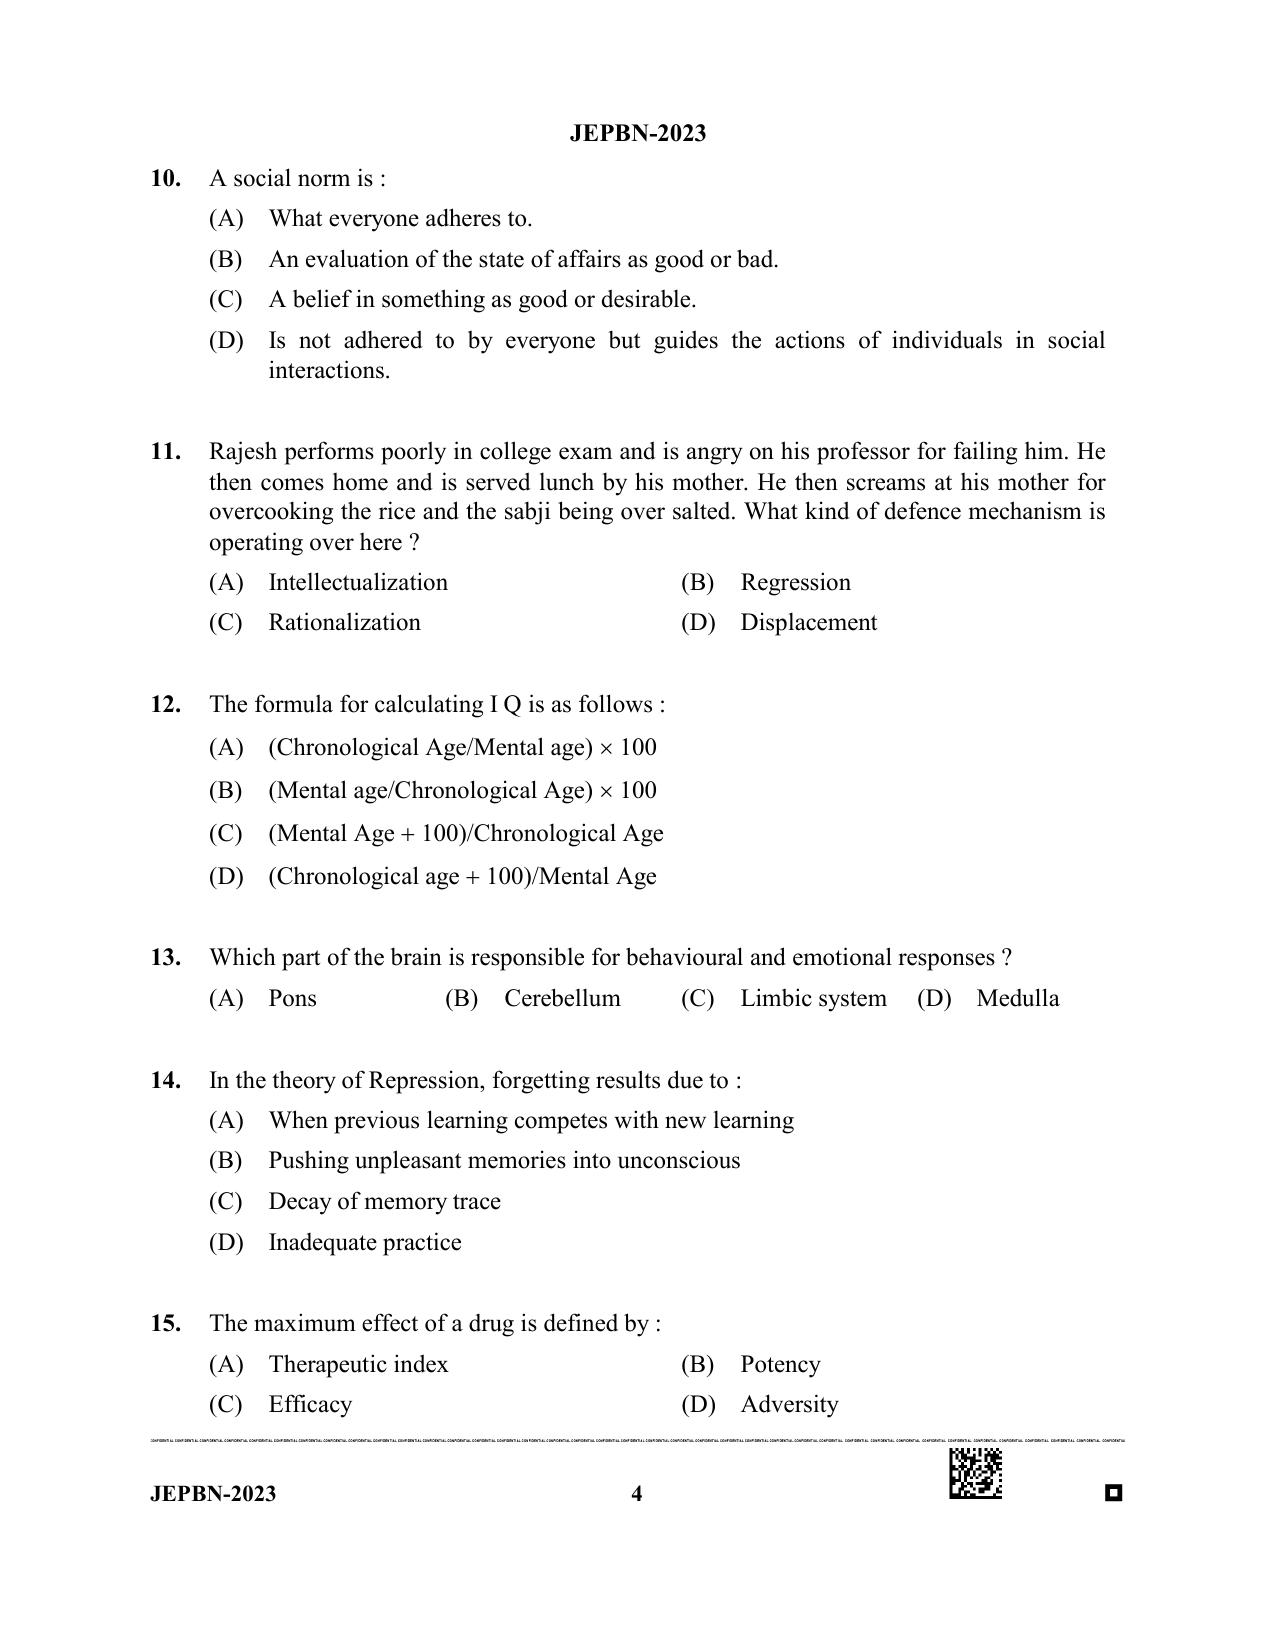 WBJEE JEPBN 2023 Question Paper - Page 4